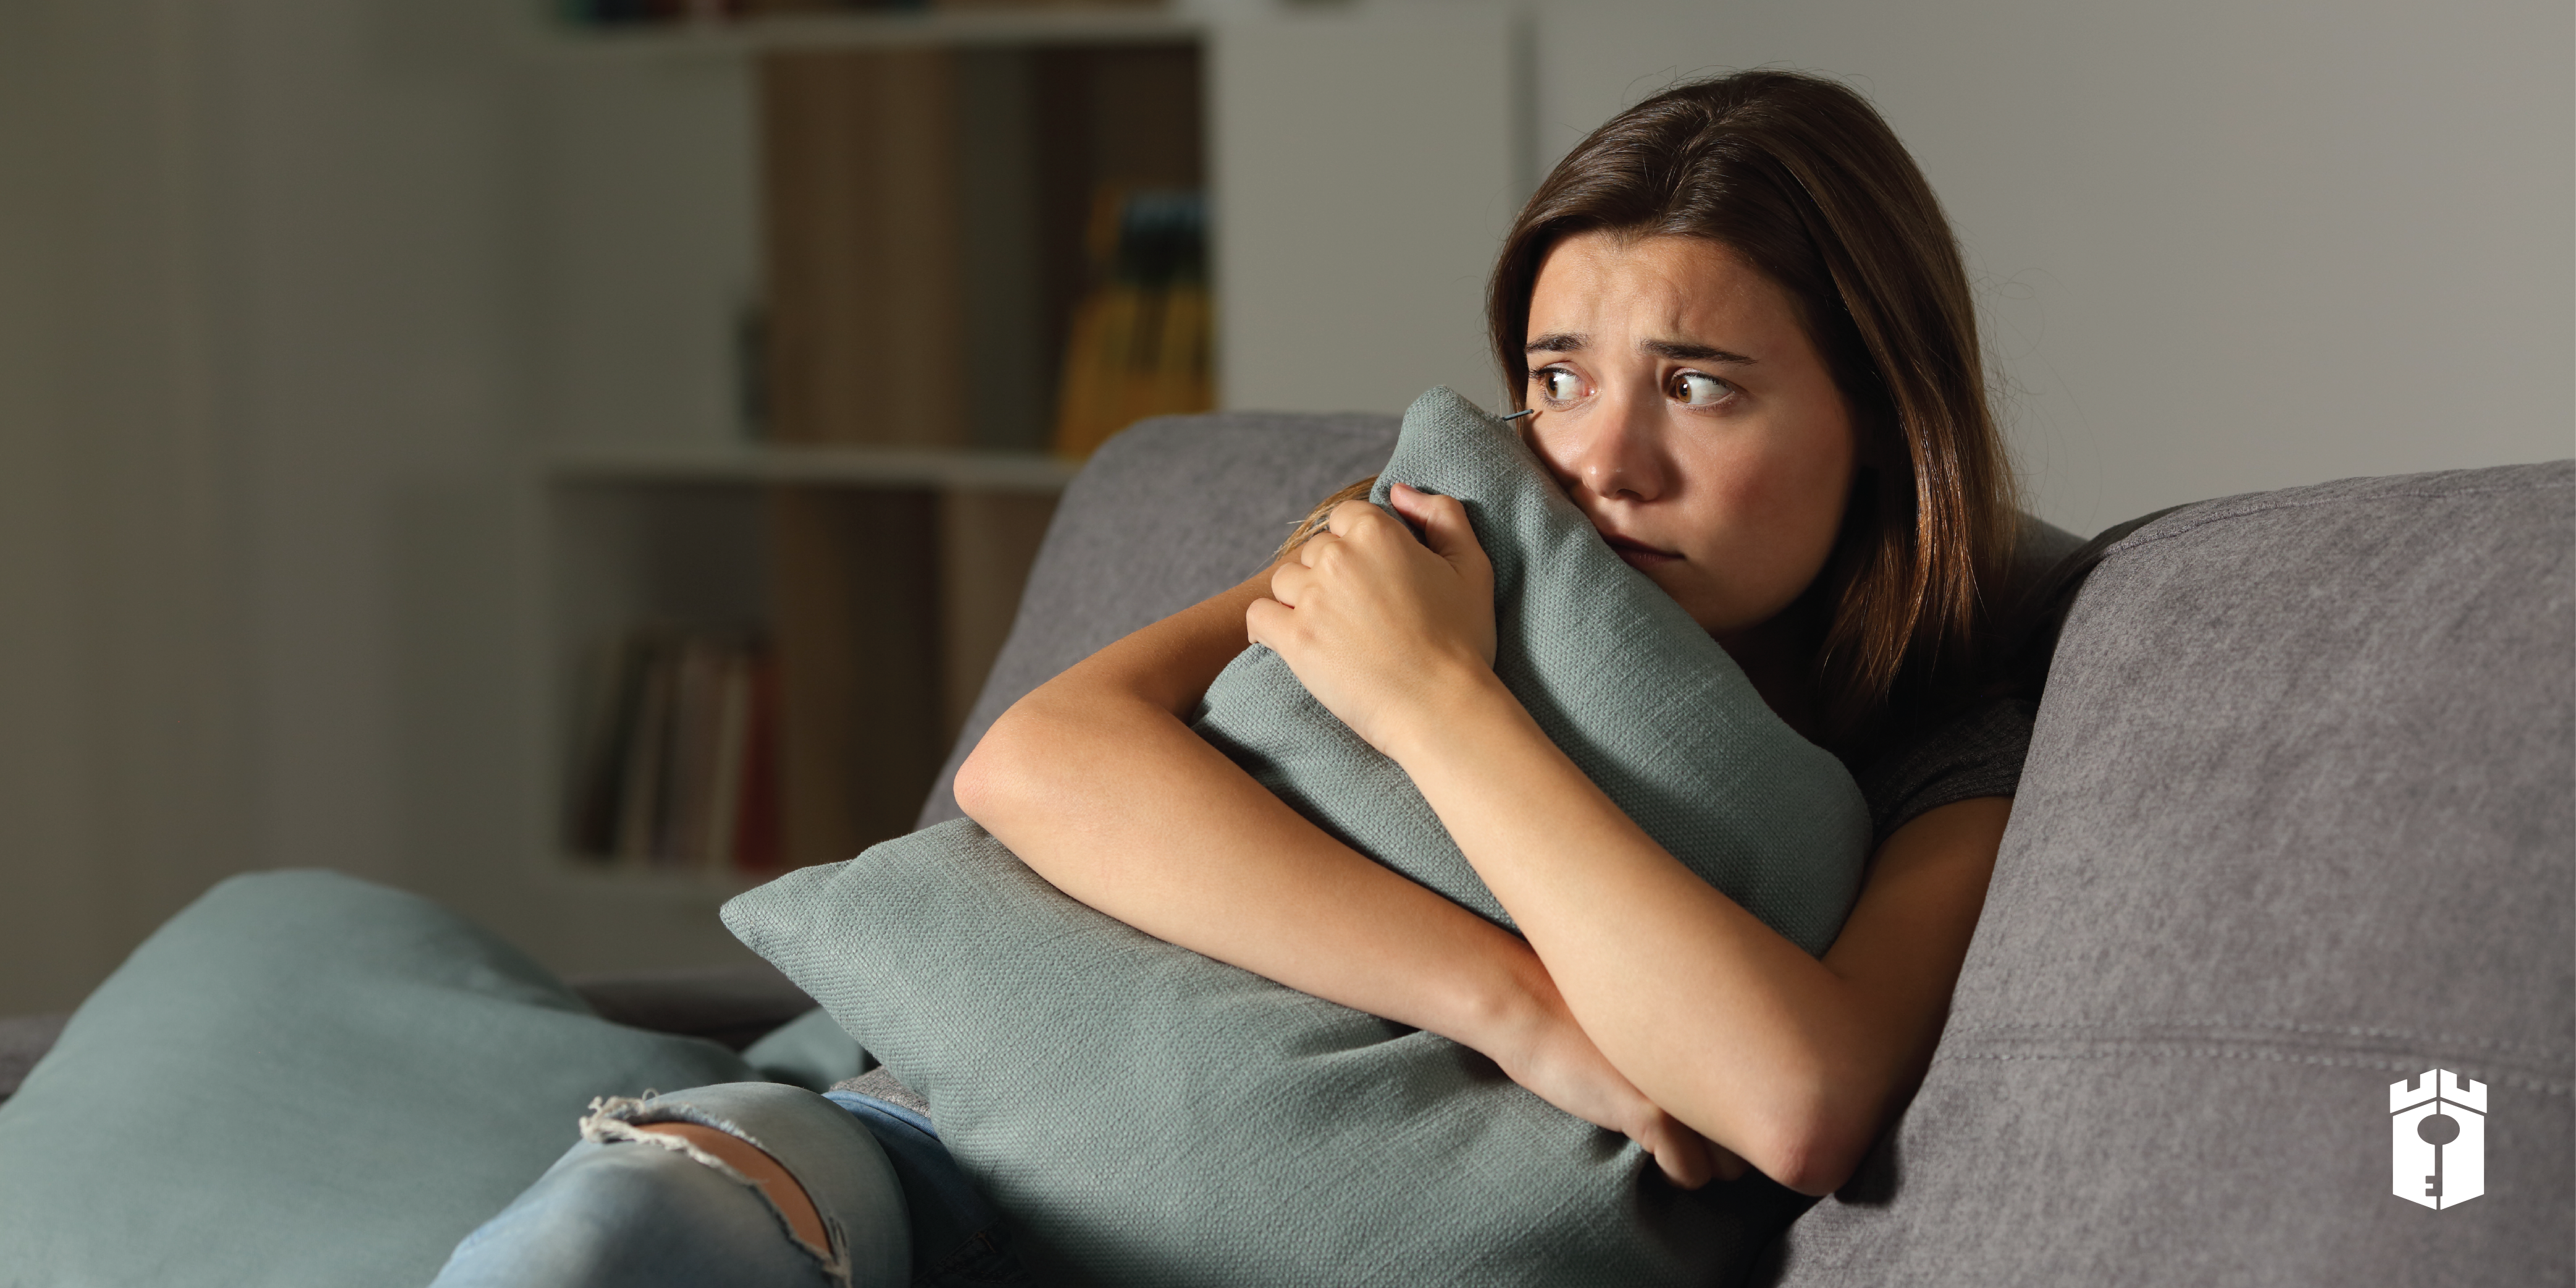 woman scared clutching pillow while sitting on couch